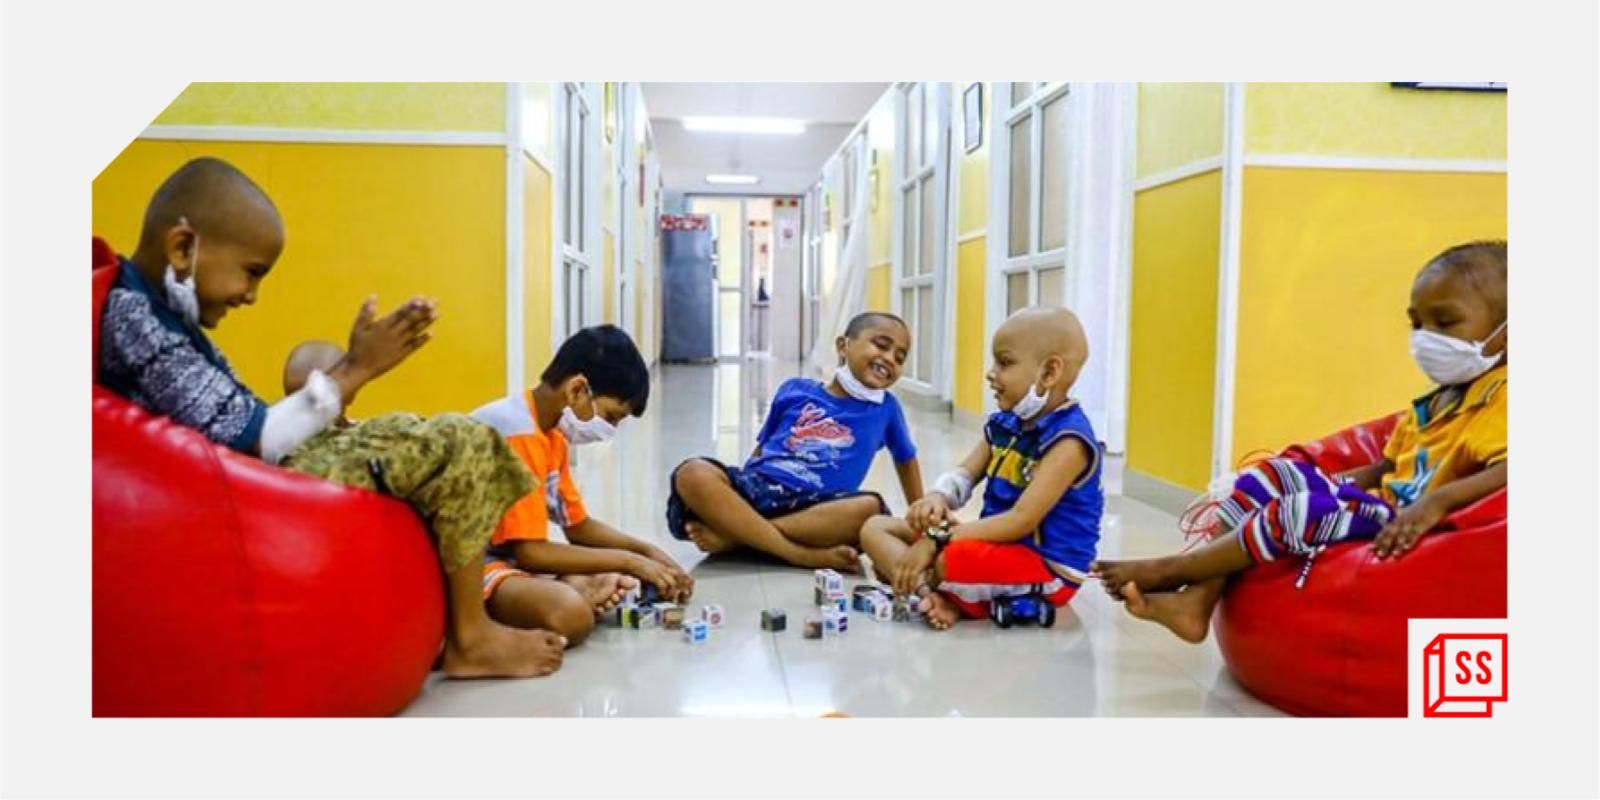 This Mumbai-based NGO supports underprivileged children with cancer and their families